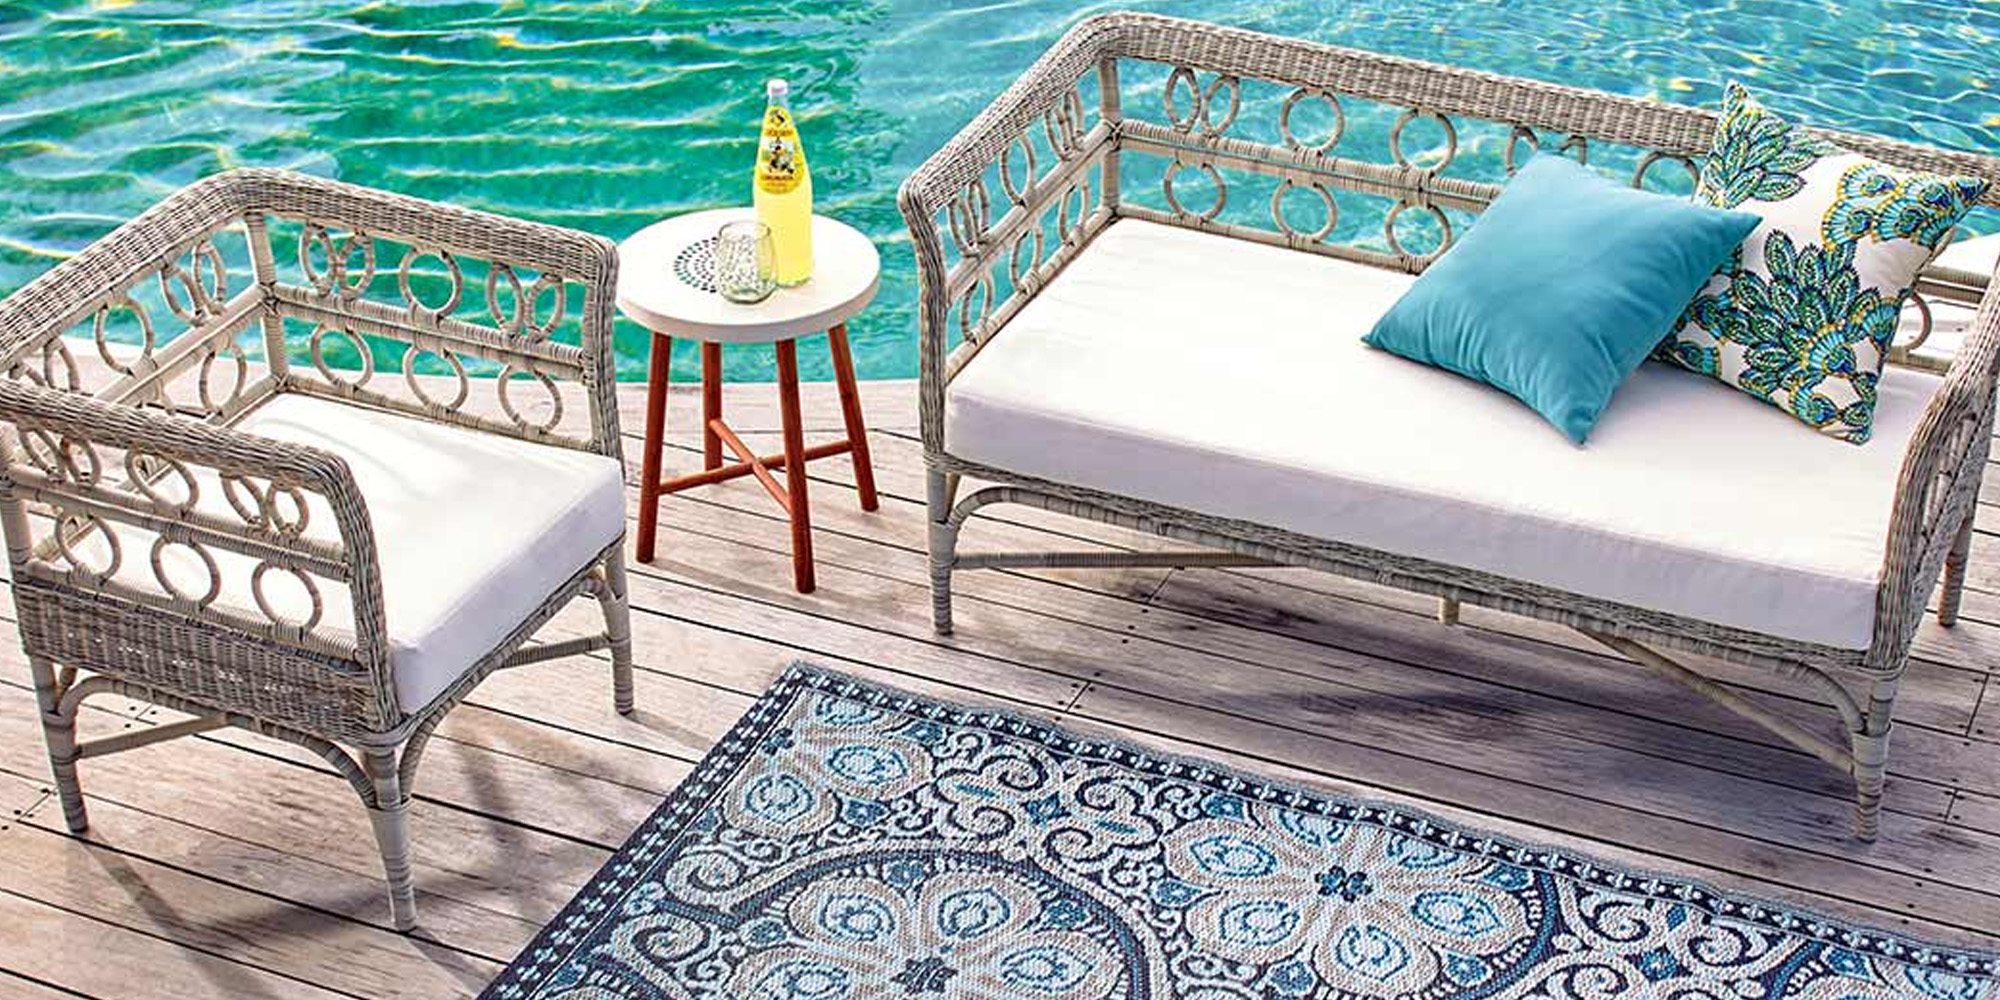 World Market outdoor furniture sale with up to 30% off: hammocks, patio sets, more - 9to5Toys